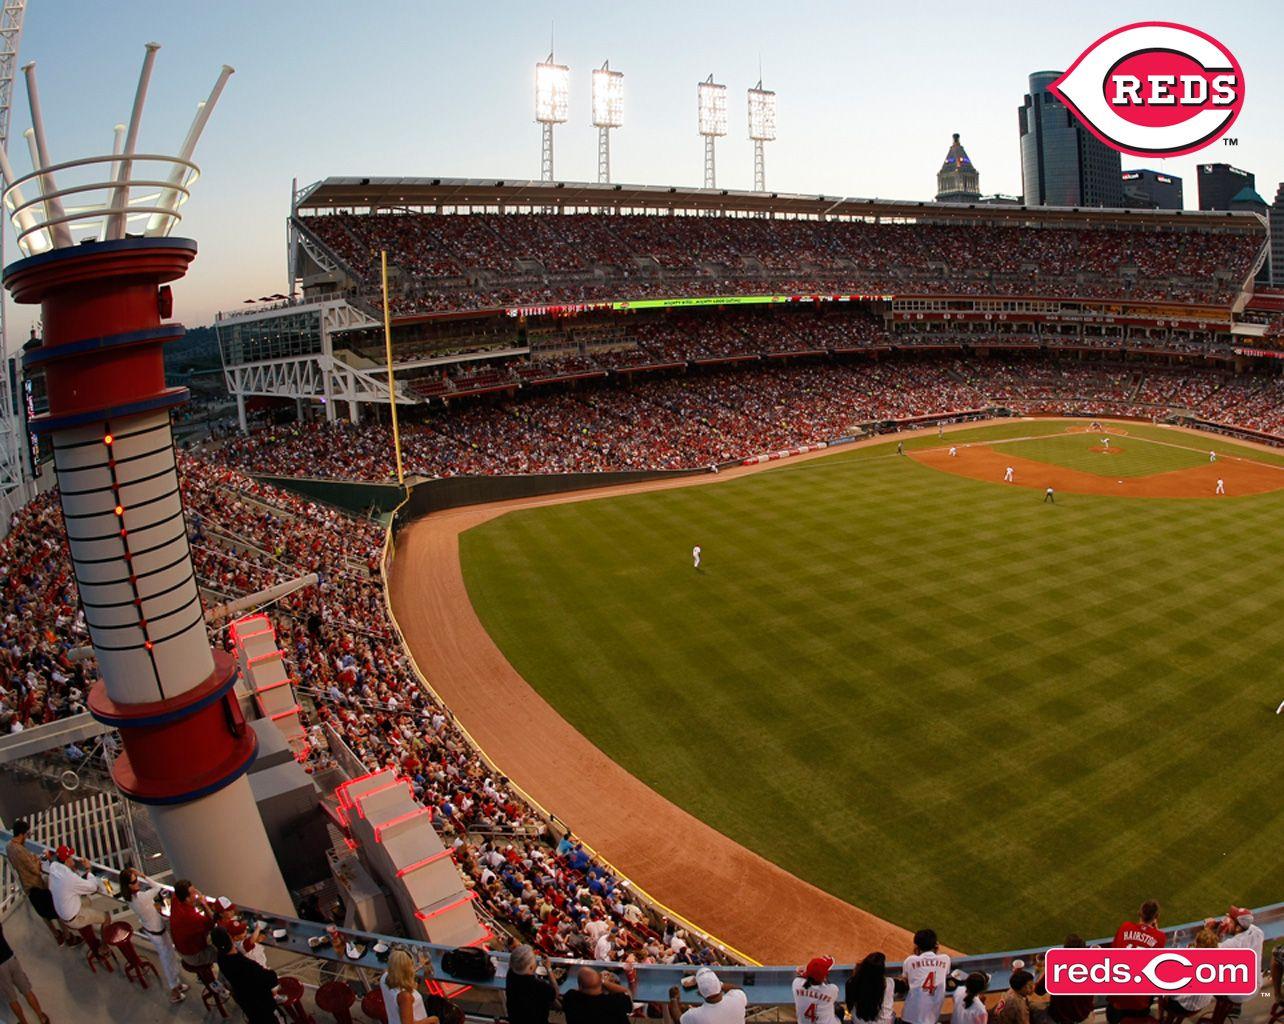 Great American Ball Park Wallpapers - Wallpaper Cave